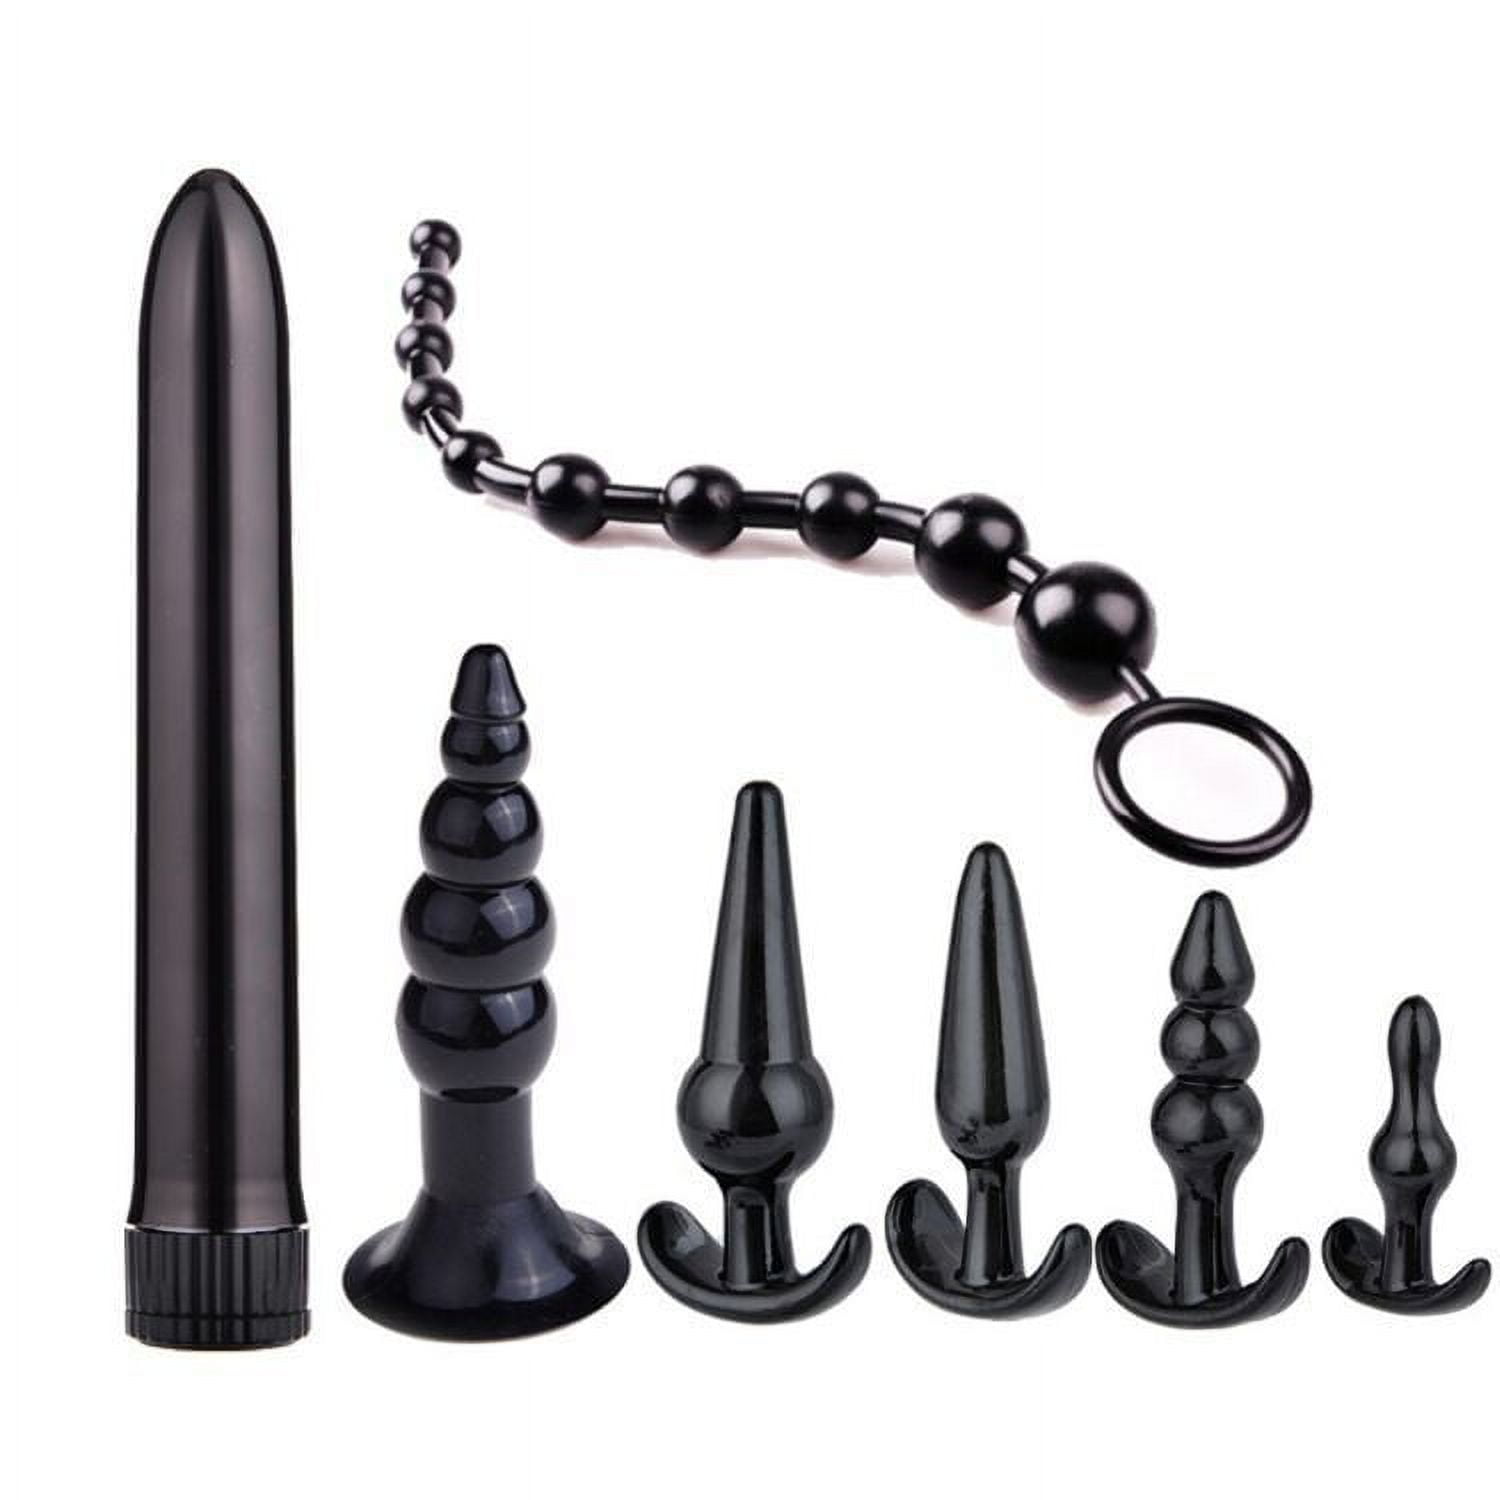 ButtPlug Trainer Kit for Comfortable Long-Term Wear, Pack of 7 Silicone  AnalPlug Training Set with Flared Base Prostate Toys for Advanced Users -  Walmart.com